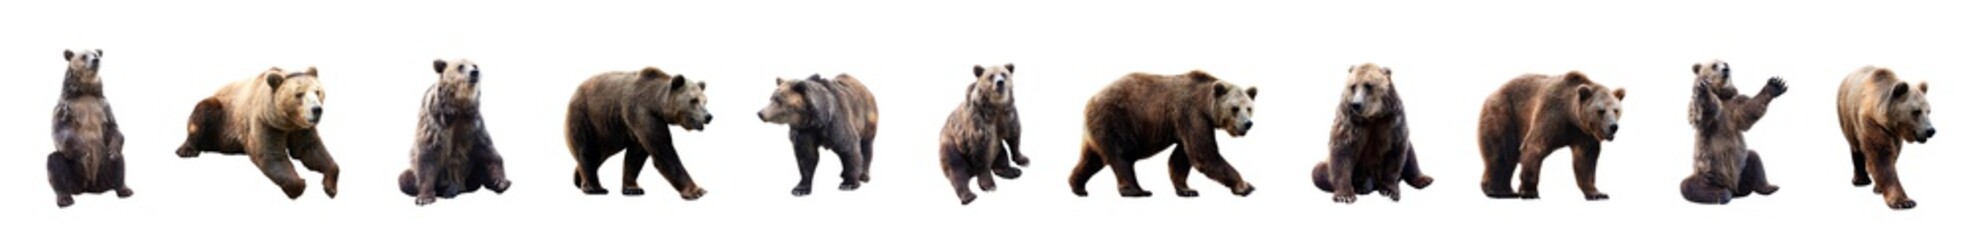 Set of brown bears over white background. Large collection of dangerous predators of grizzly bears. 